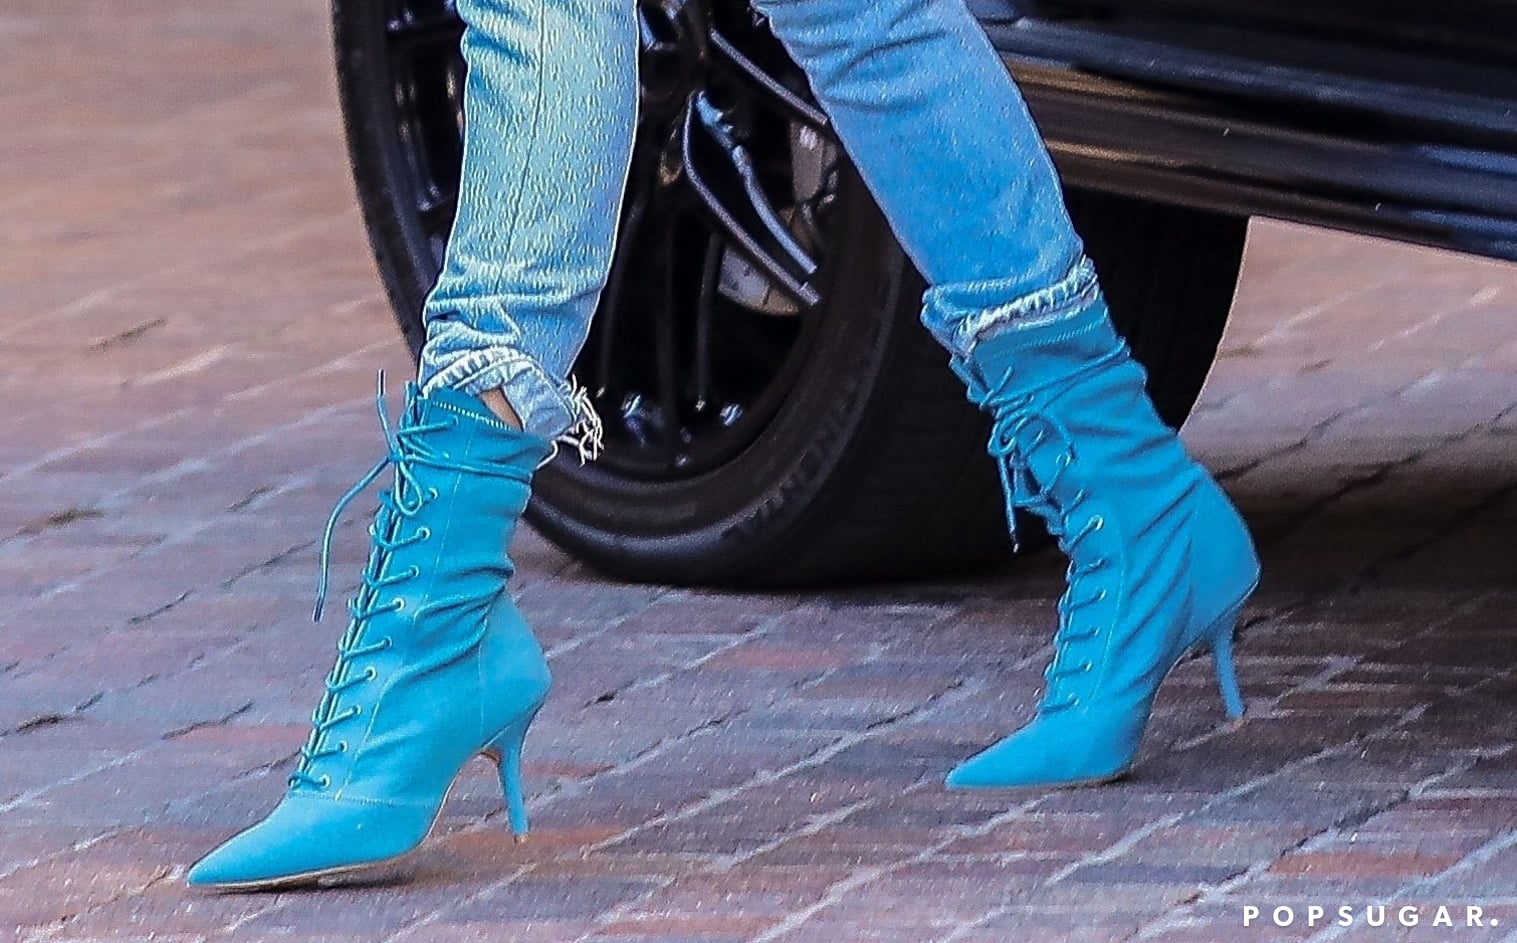 yeezy lace up boots